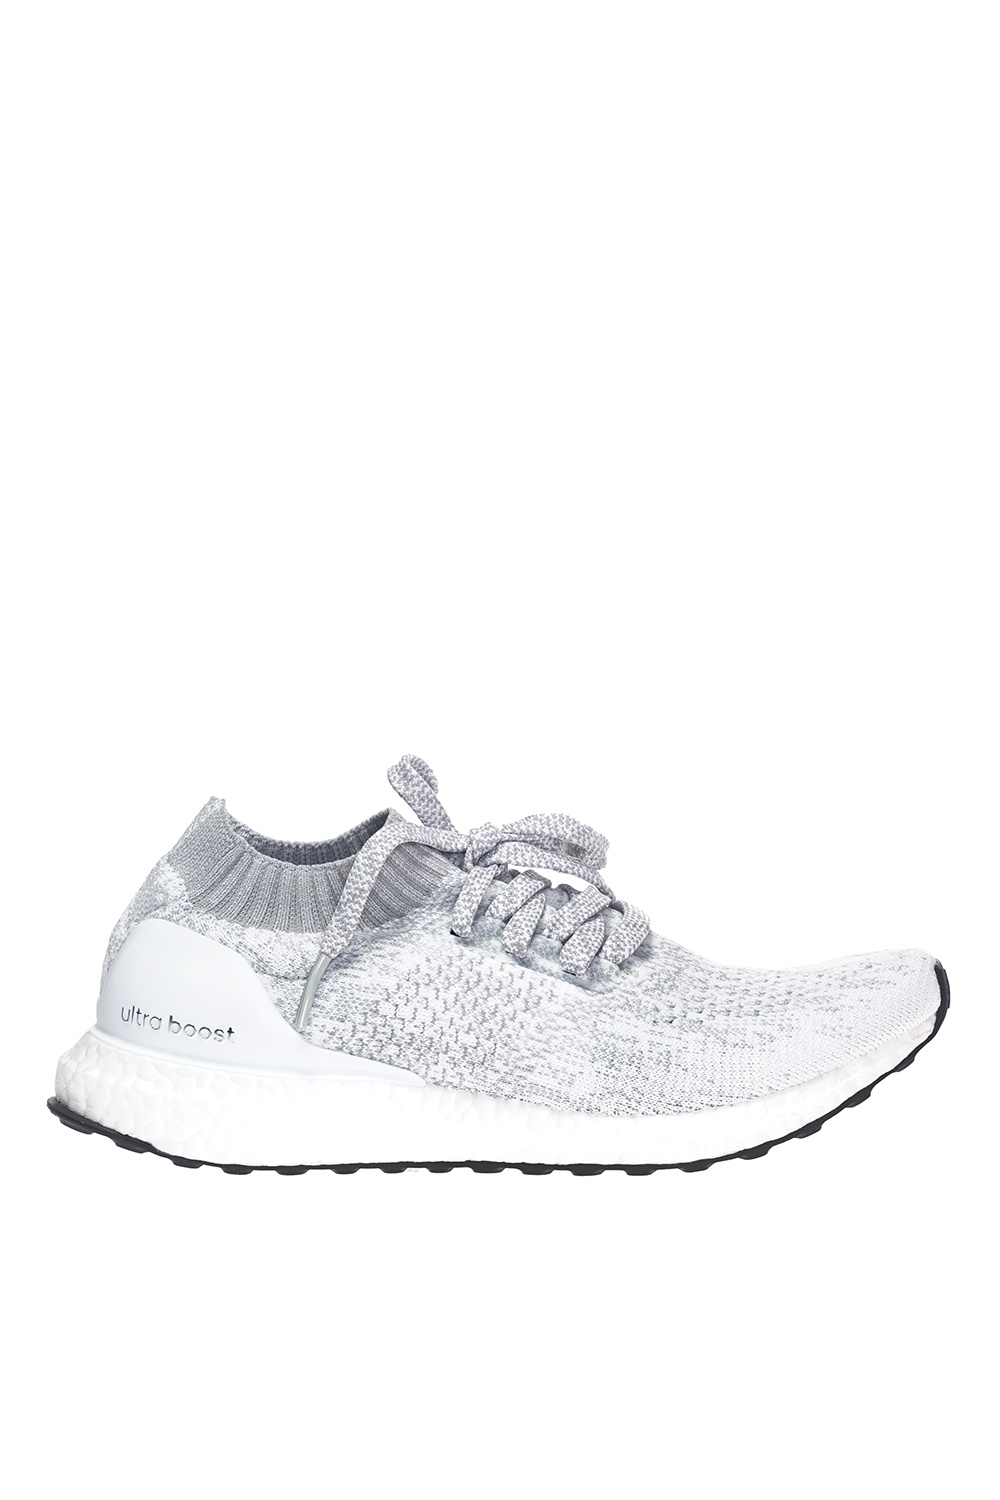 ultraboost uncaged canada